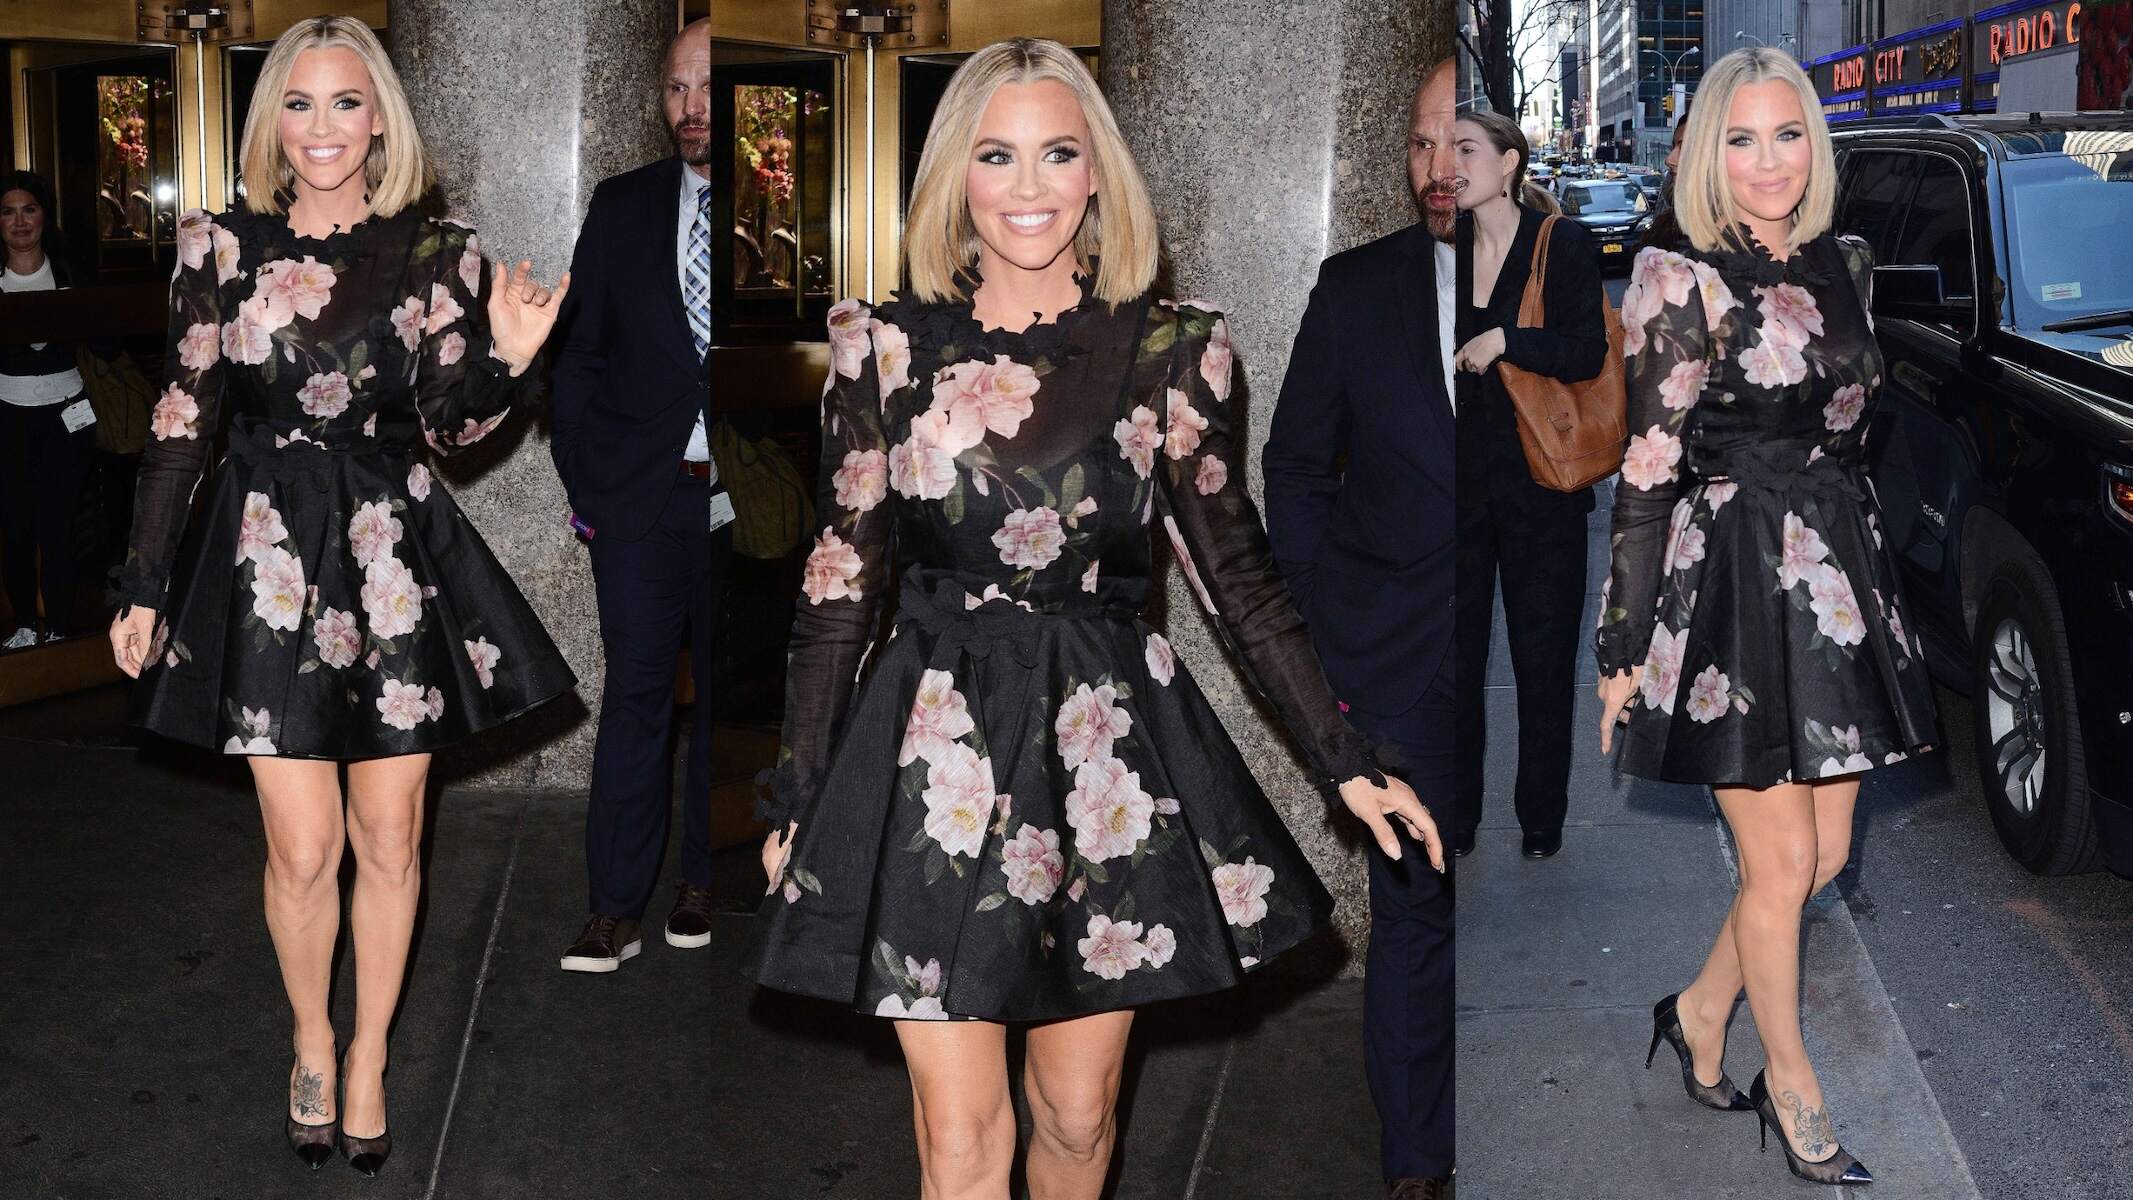 Actor Jenny McCarthy wears a black dress with pink flowers on it while standing on an NYC street